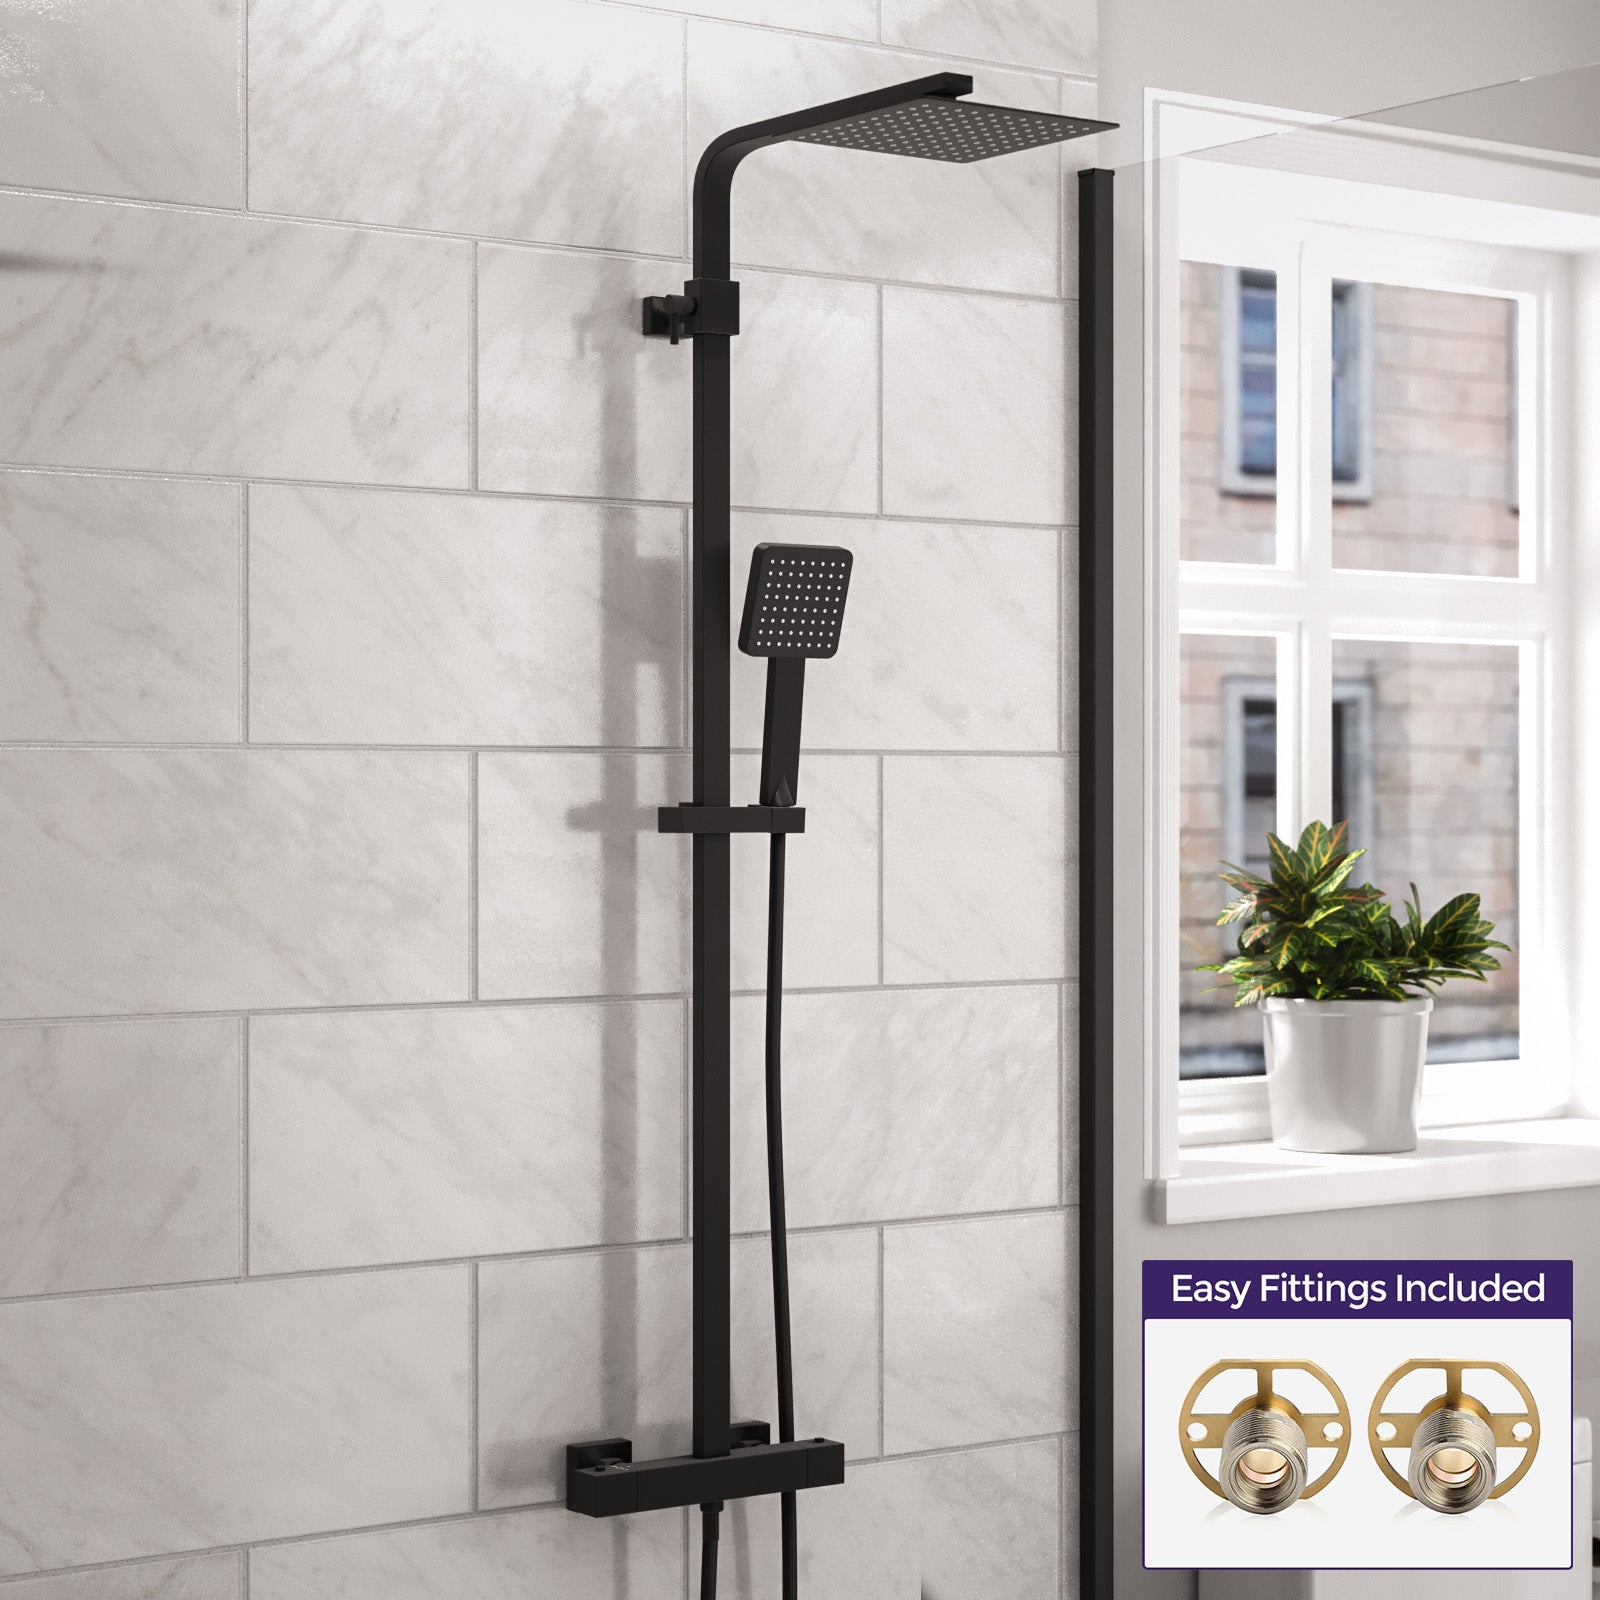 Modern Square Matte Black Exposed Thermostatic Mixer Shower Set With Easy Fittings